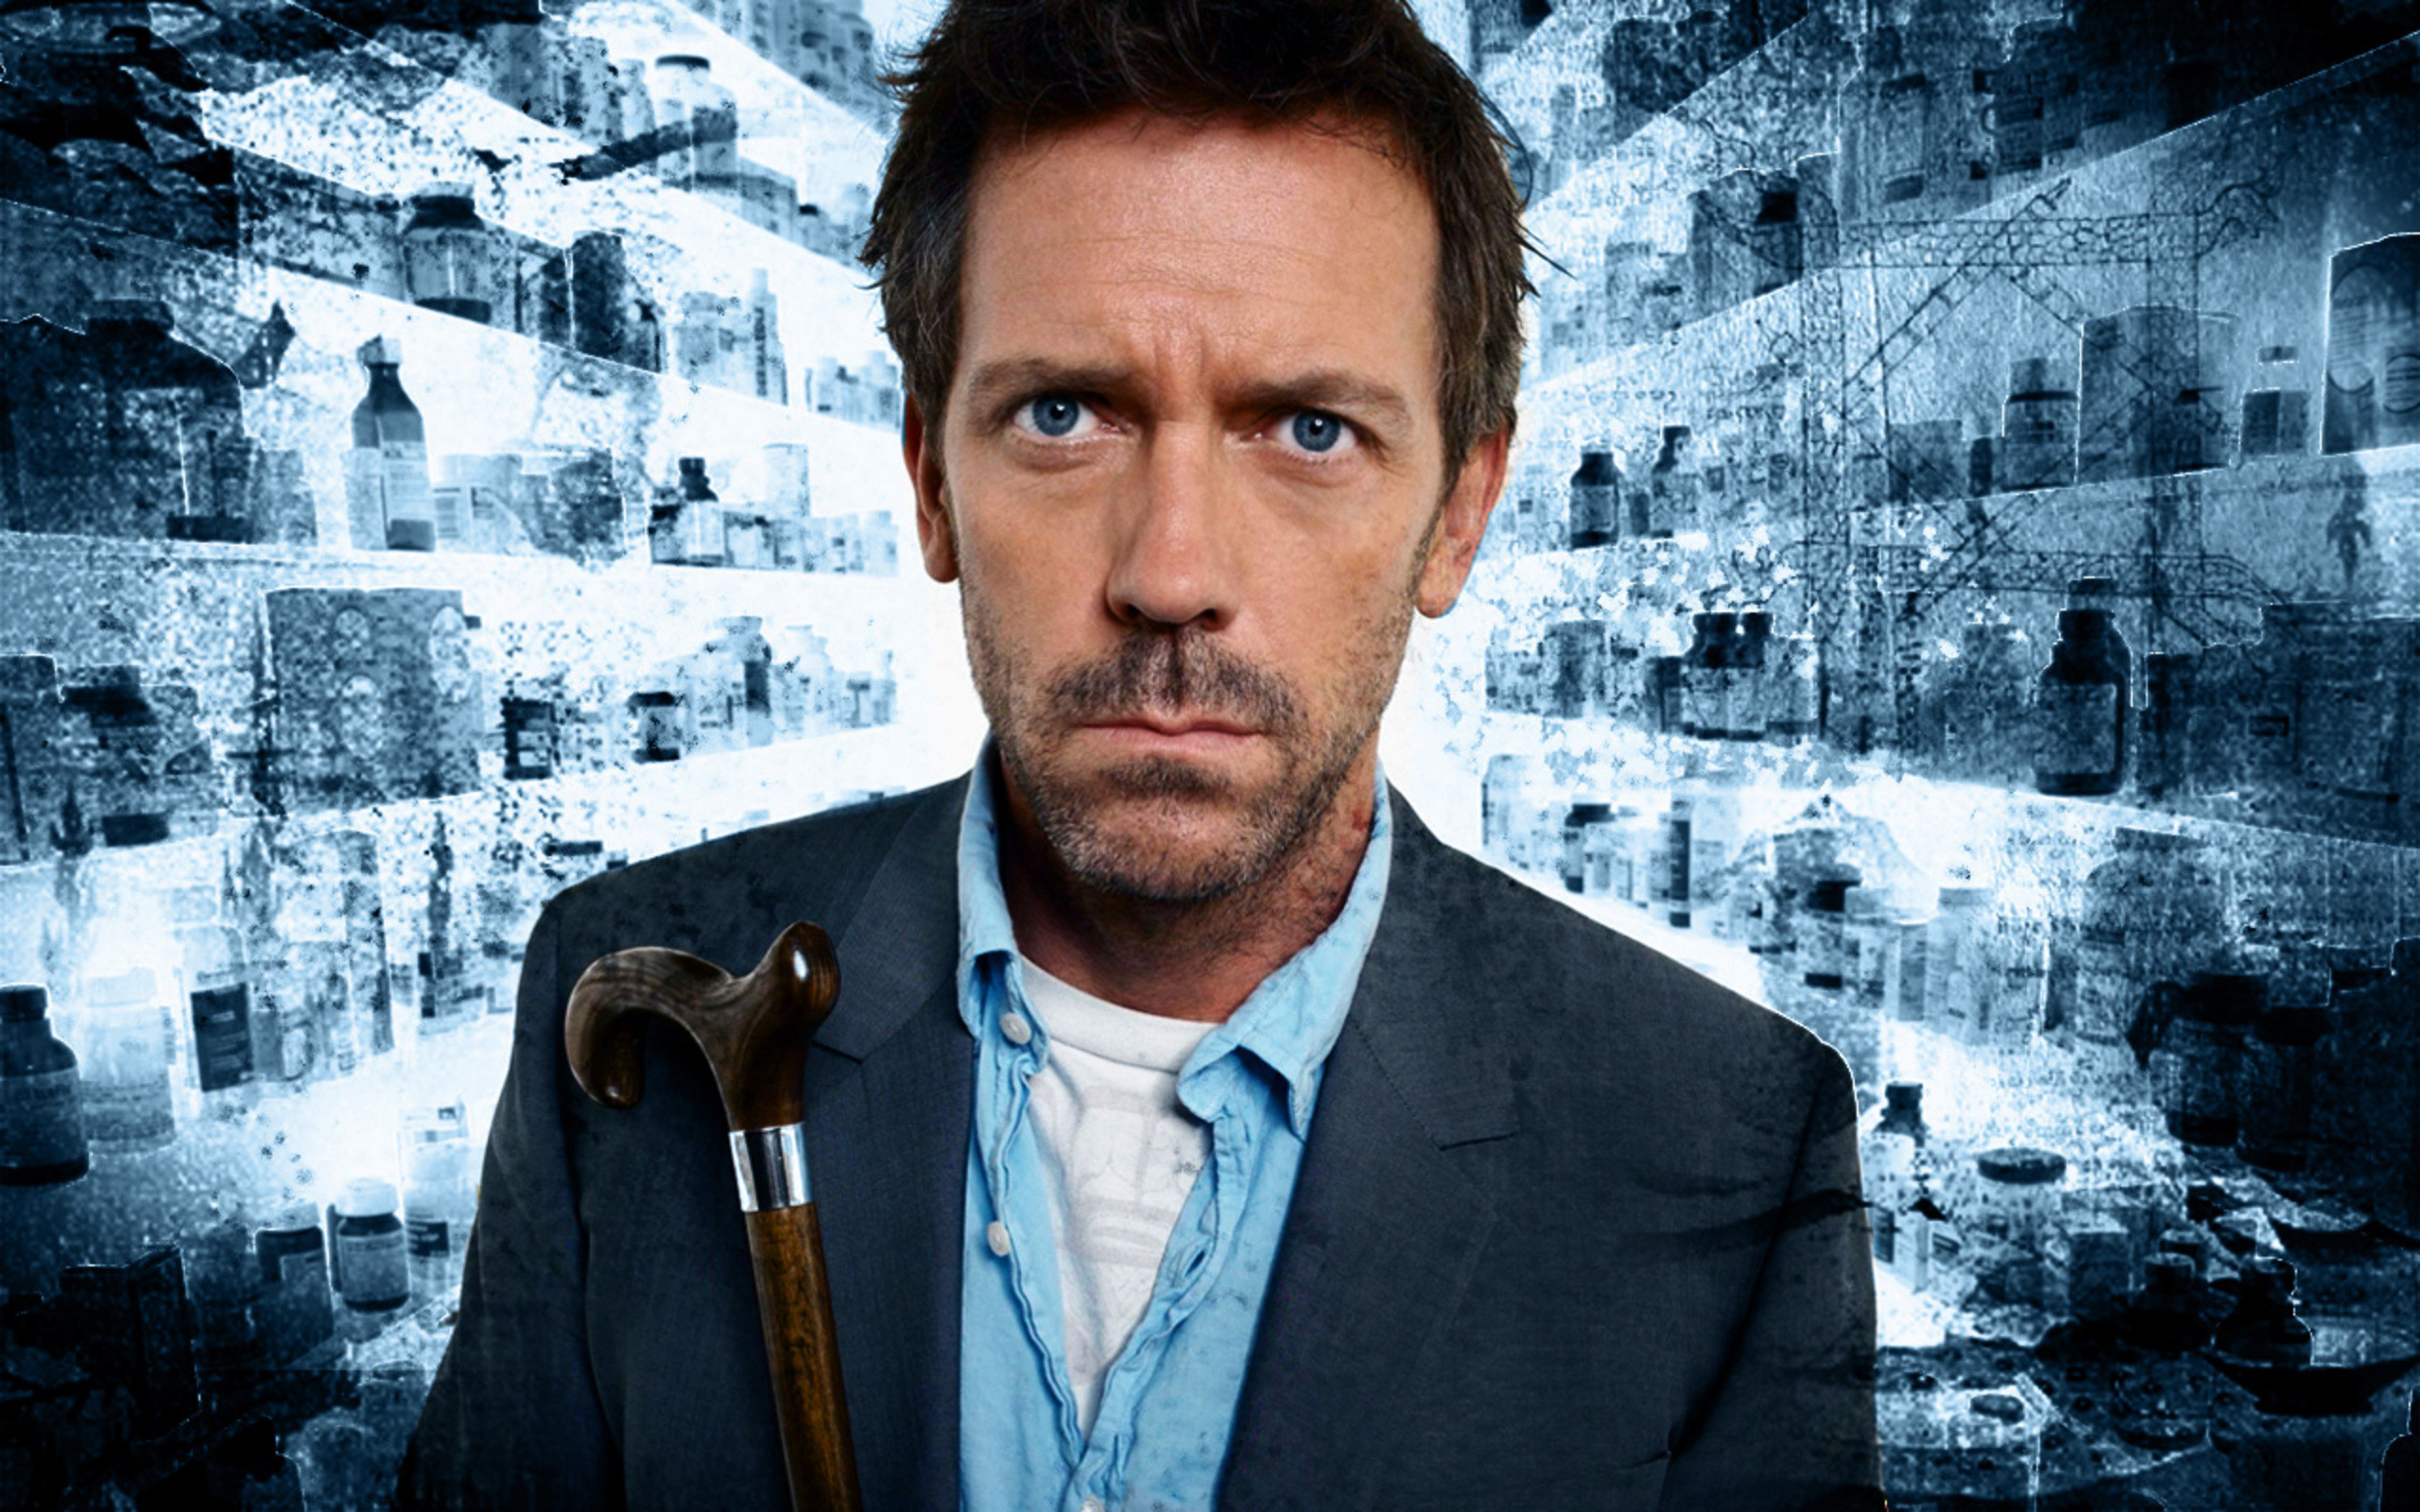 Wallpaper.wiki HD House Md Image PIC WPD002304